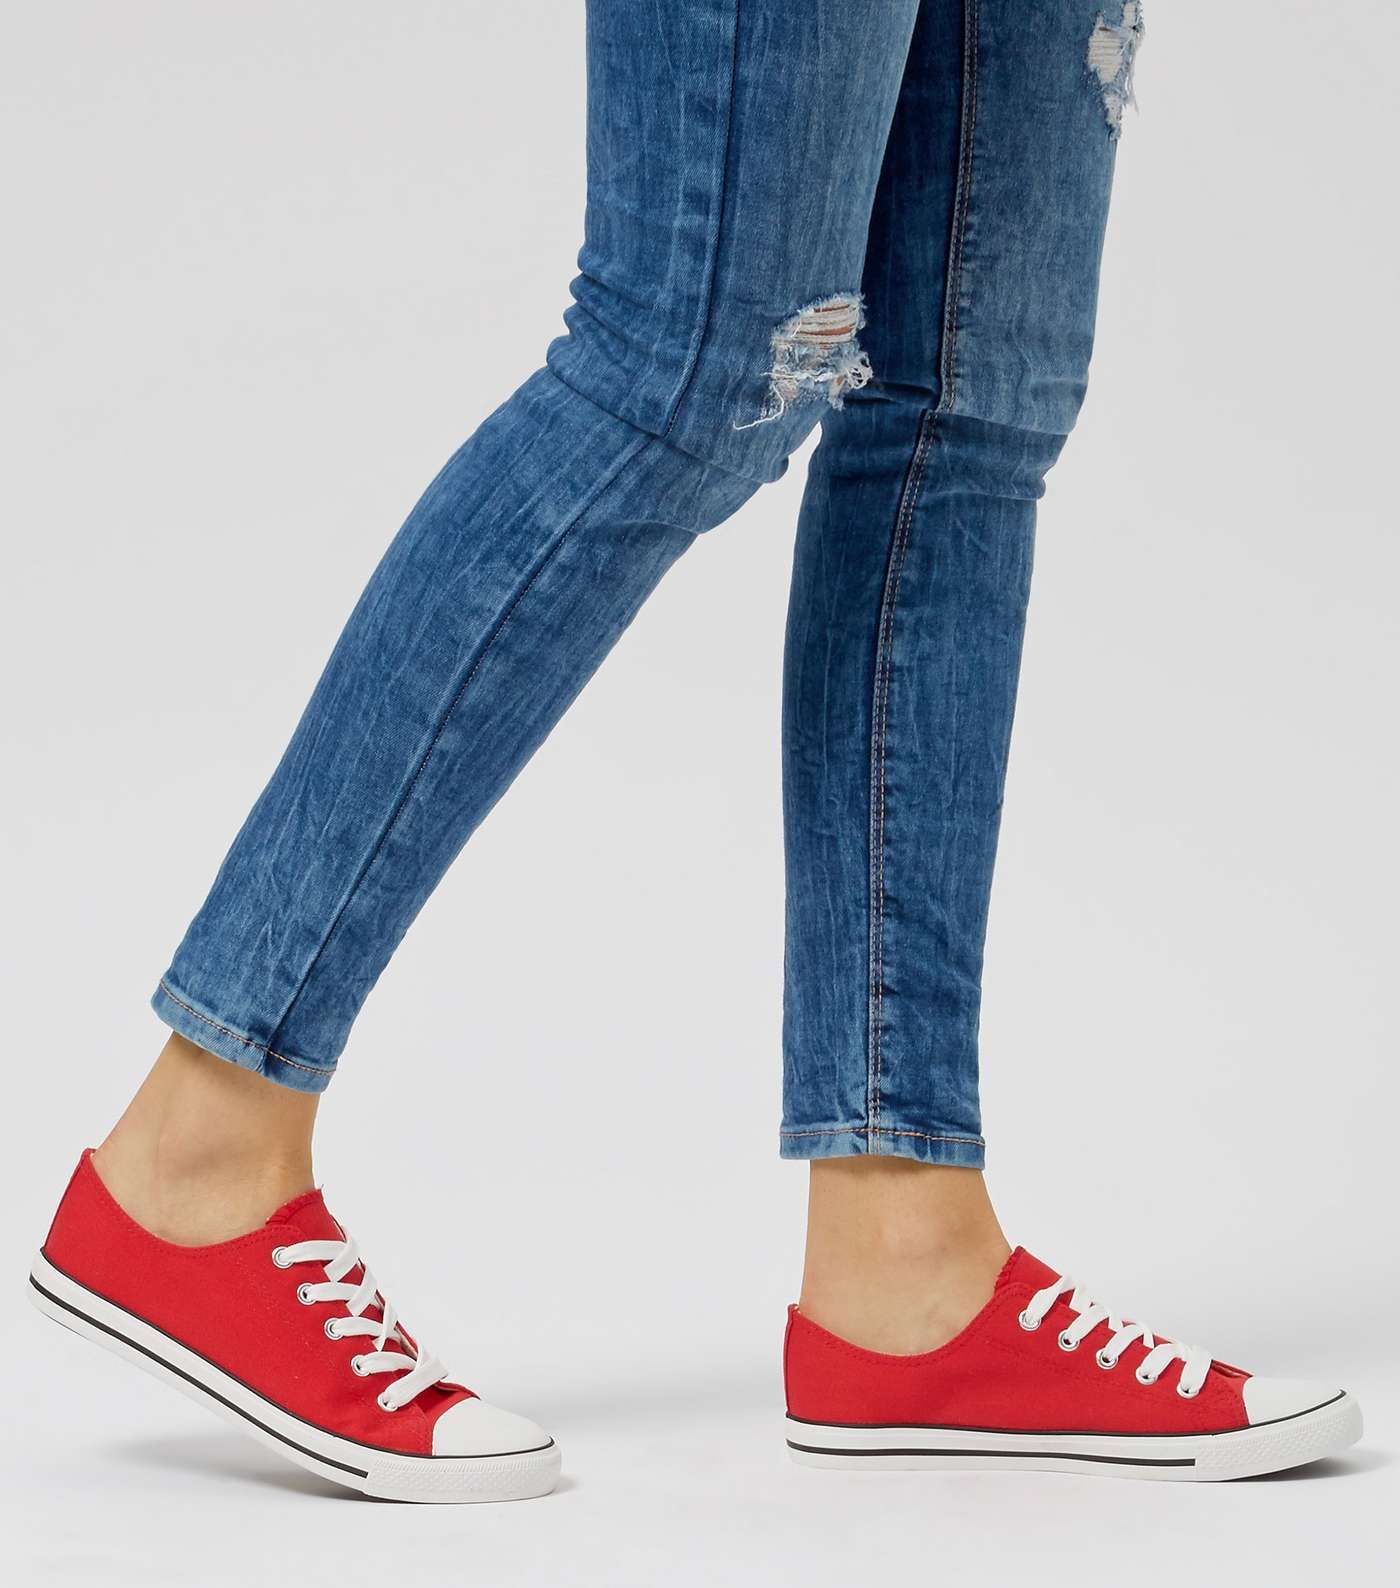 Red Lace Up Striped Sole Plimsolls  Image 5